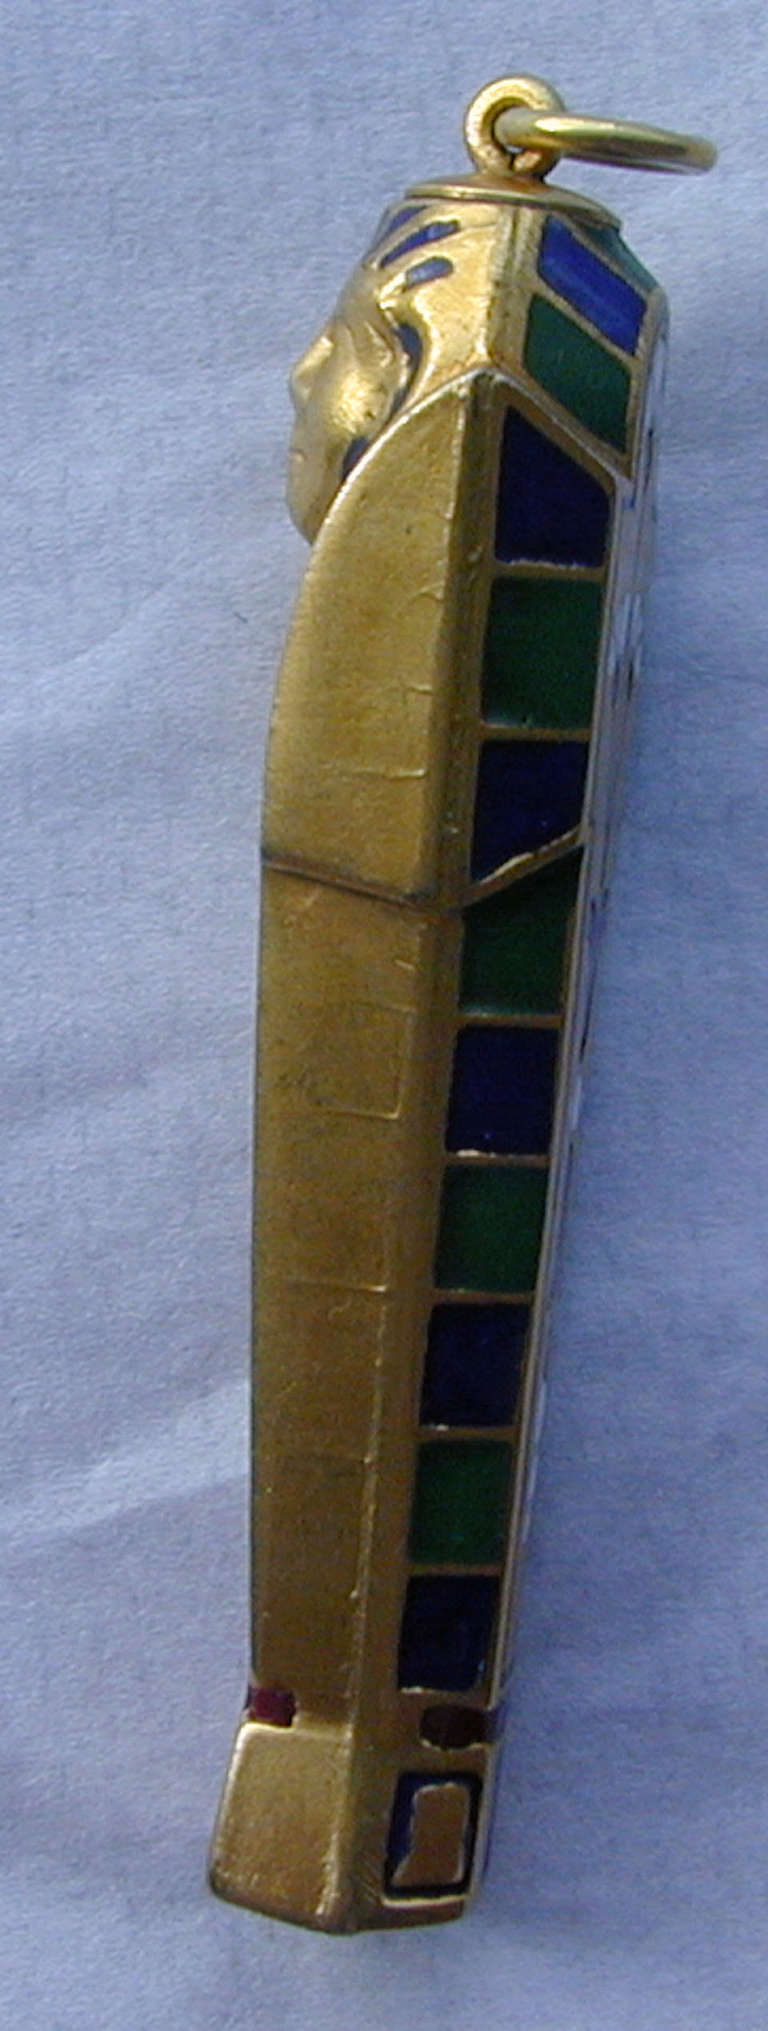 Victorian Egyptian Revival pencil in an unusually large size makes it fantastic to wear as a pendant. Decorated in gilt metal and enamel in bright colors it will draw the eye to its wonderful design. The pencil measures 2 3/4